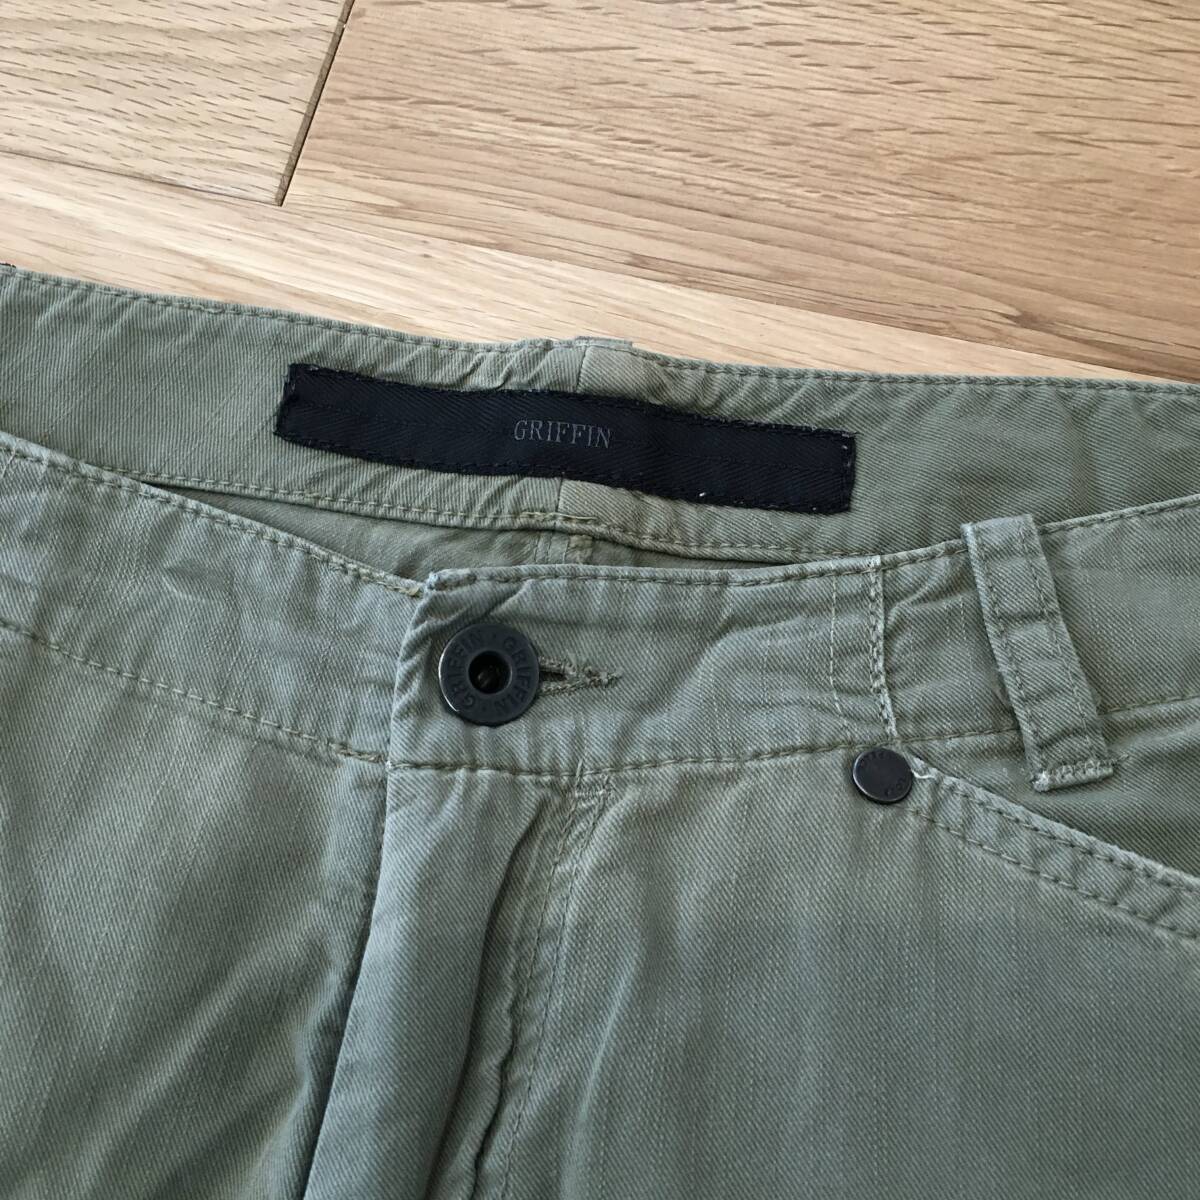  griffin GRIFFIN 2005ss Blade Cut Crust Pants Blade cut crust pants craft pants crash pants khaki 32